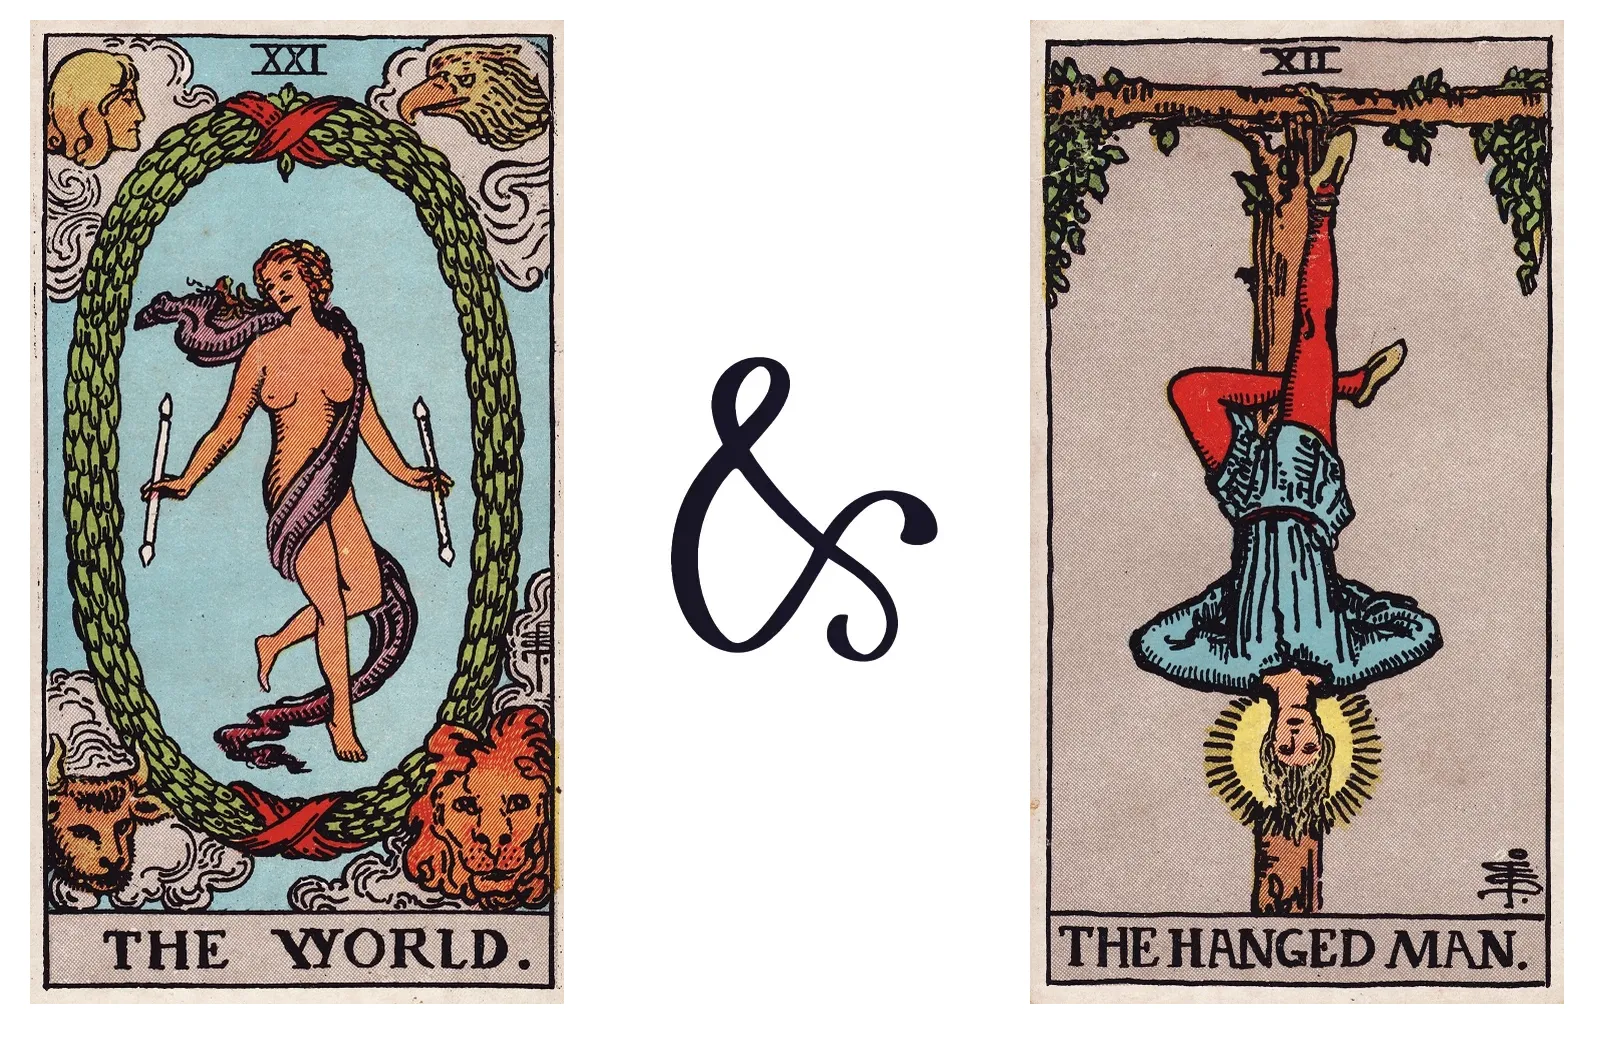 The World and The Hanged Man